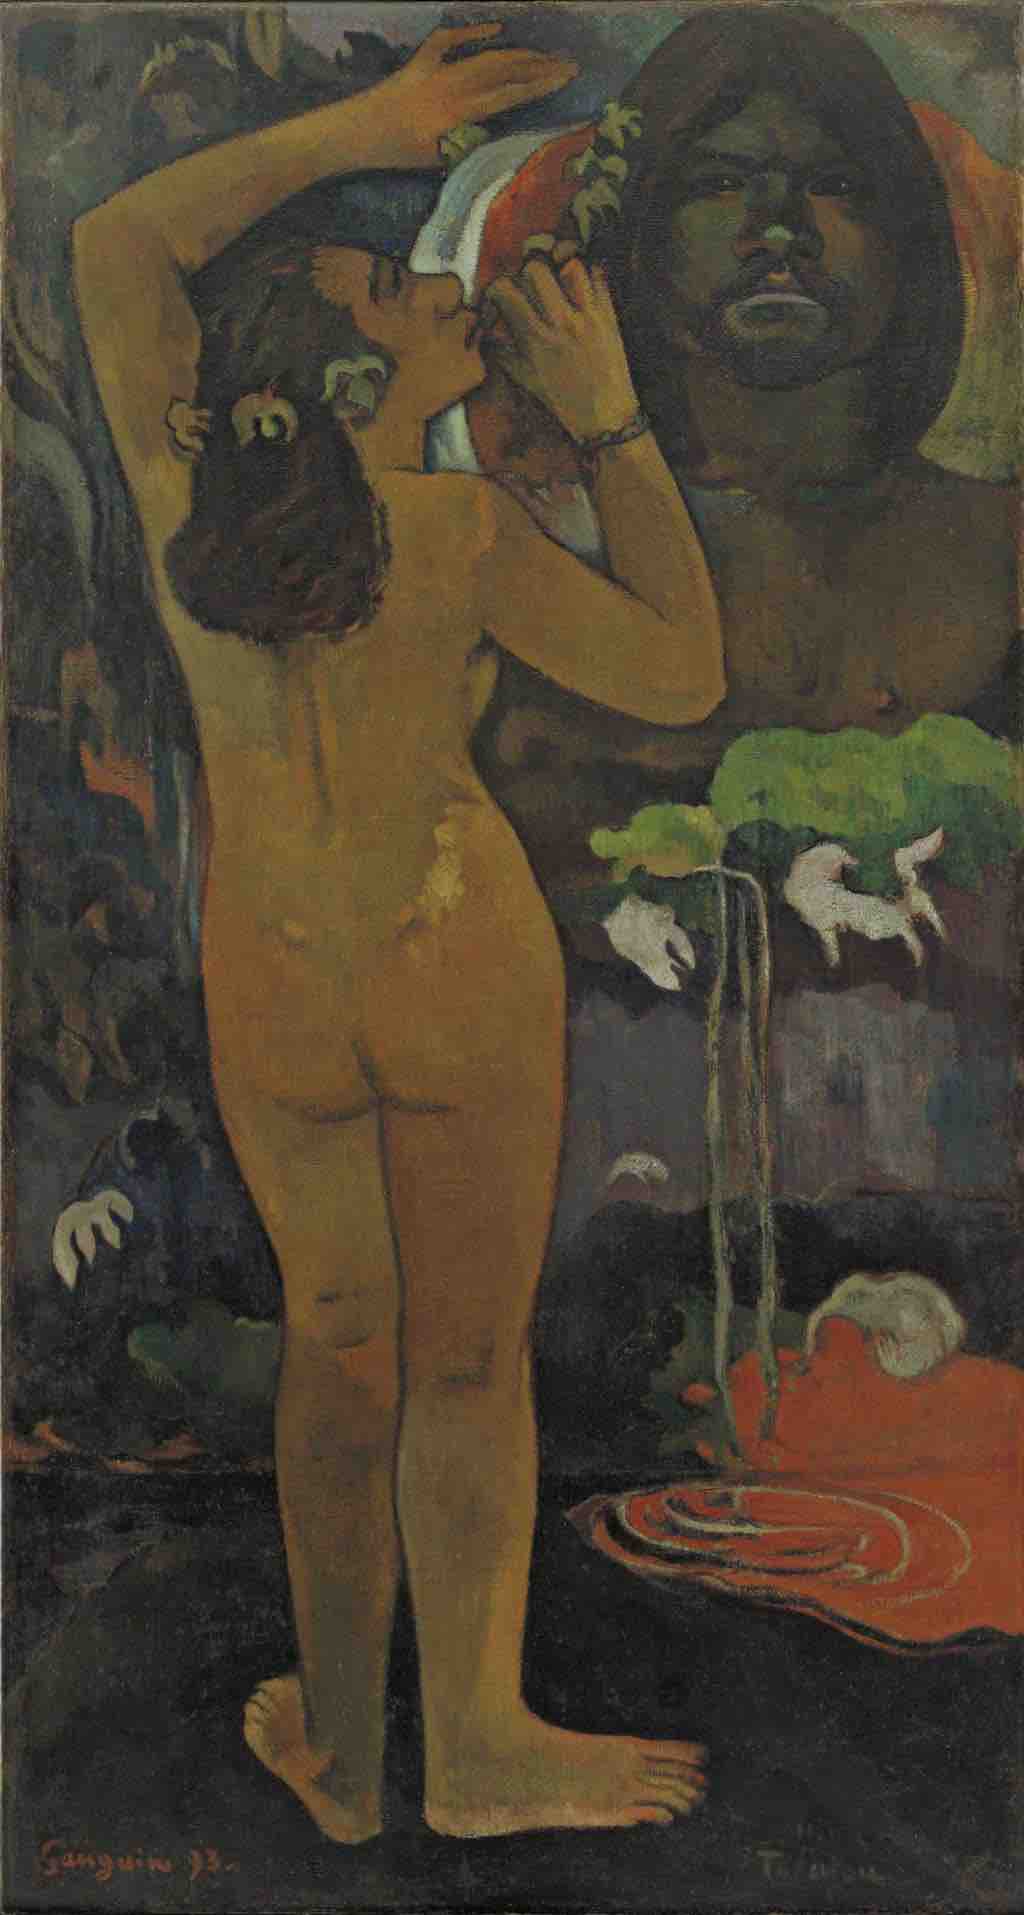 The Moon and the Earth, by Paul Gauguin, 1893